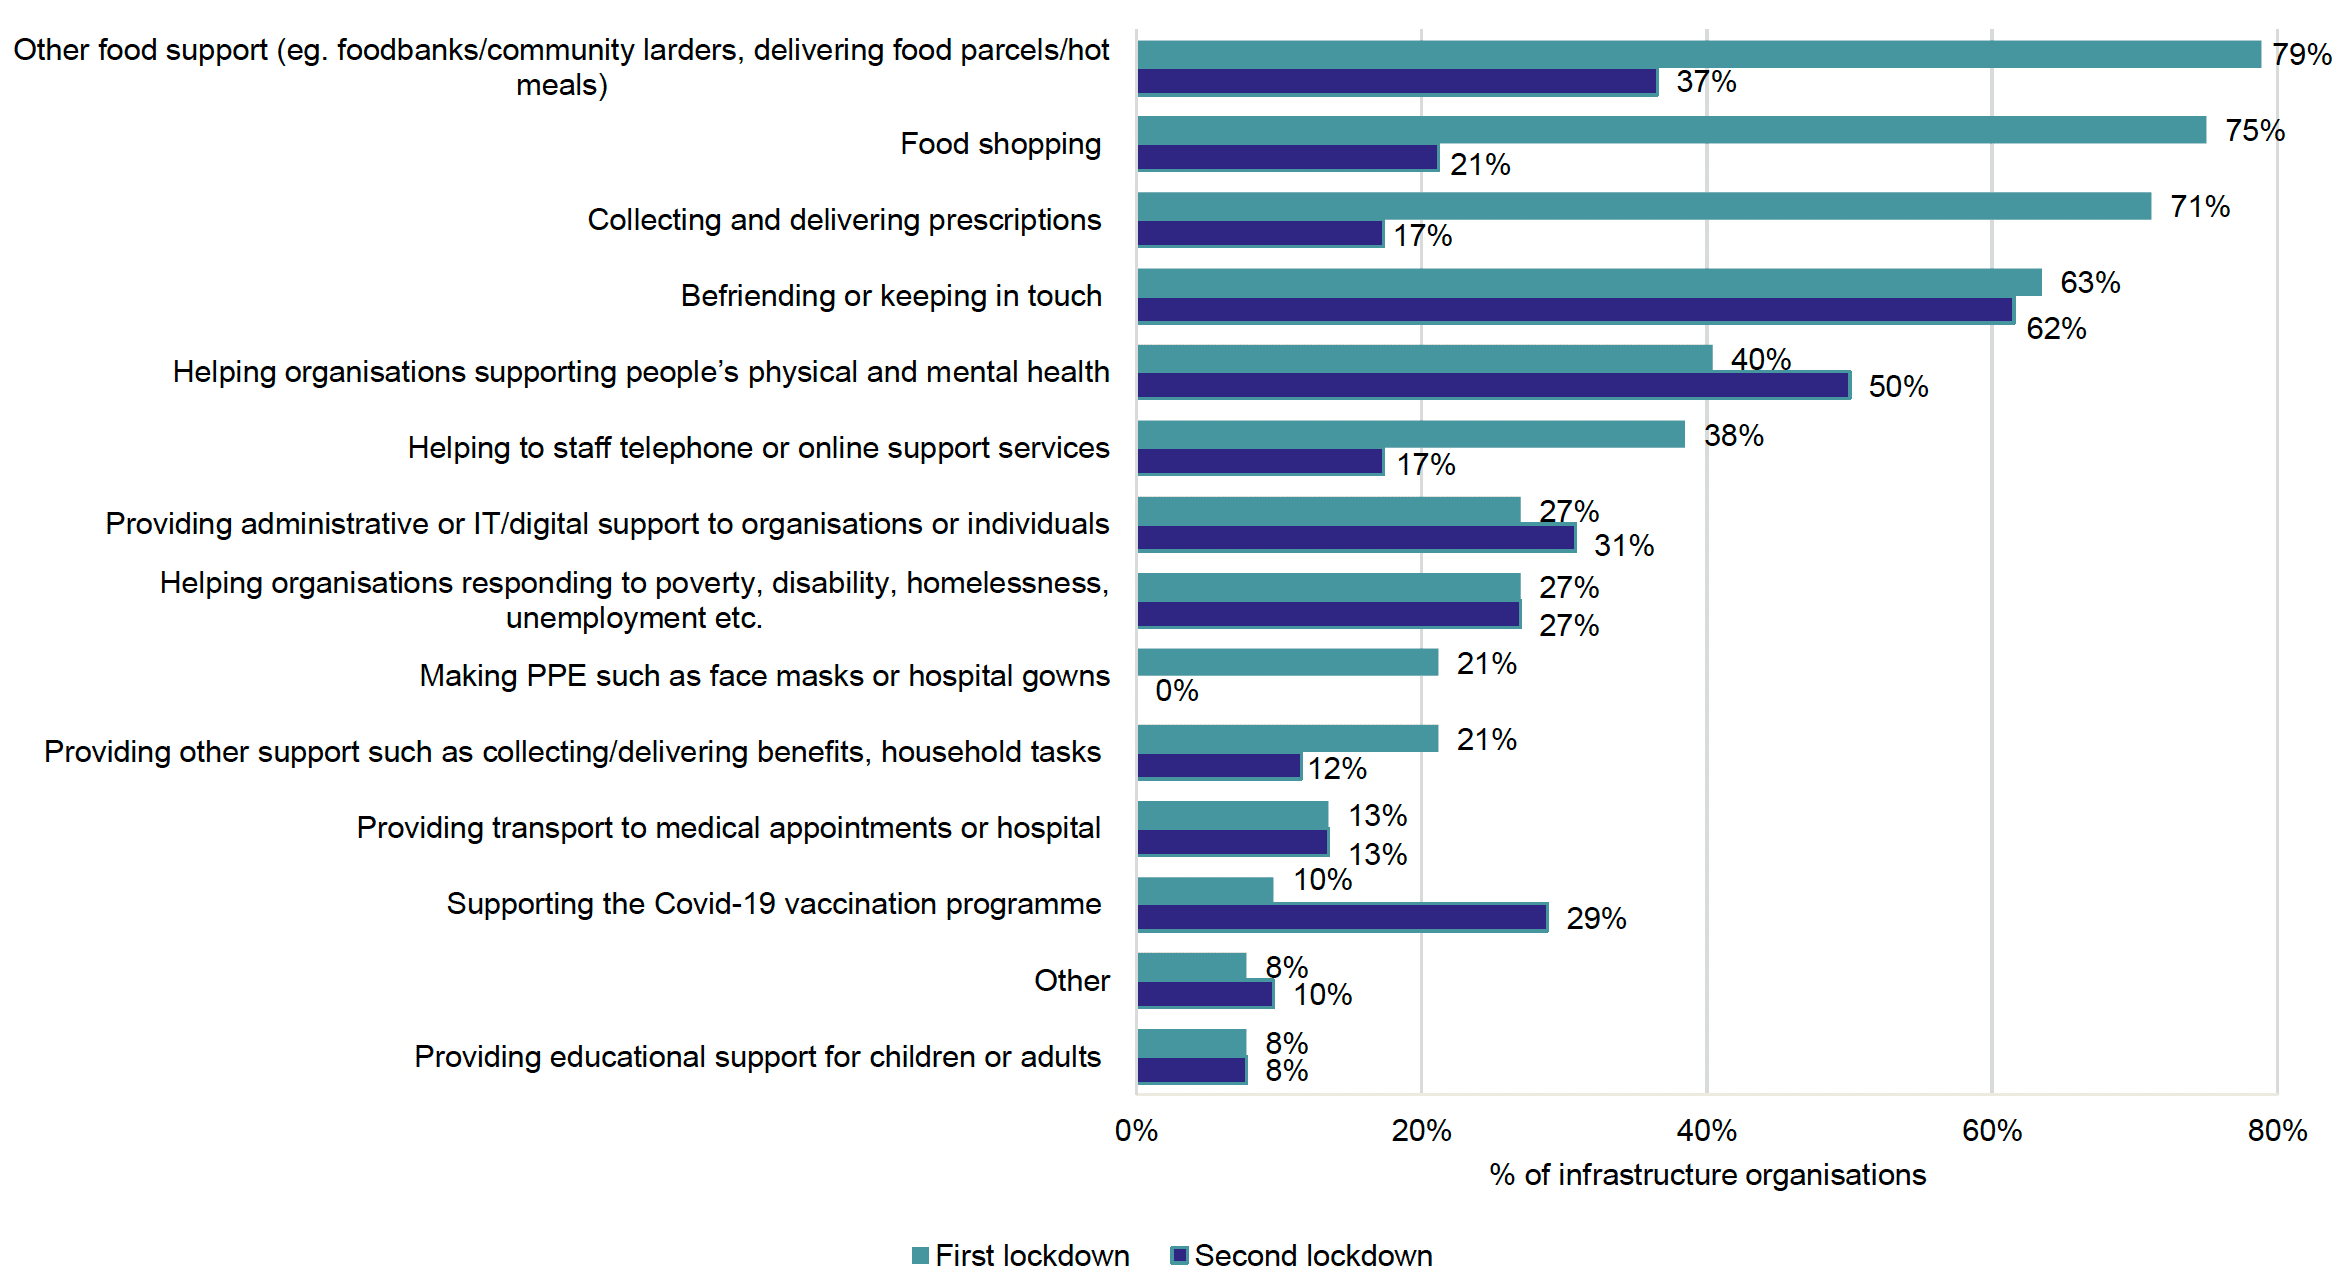 Chart showing infrastructure organisation views on the demand for volunteer tasks during the first and second COVID-19 lockdowns